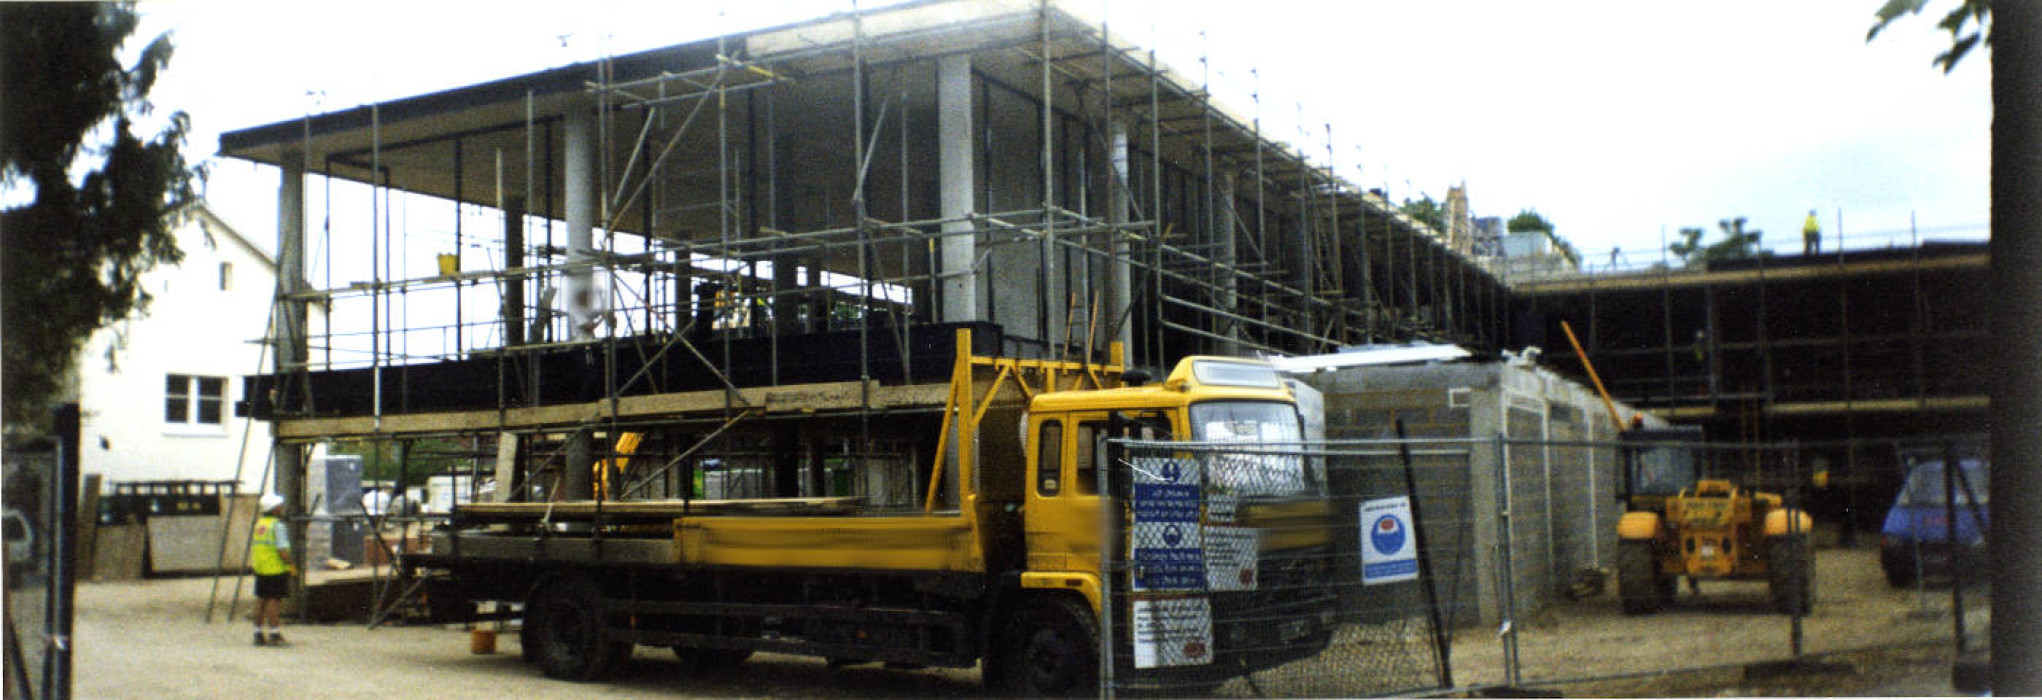 9 Coley Avenue, current home of the Royal Berkshire Archives, under construction